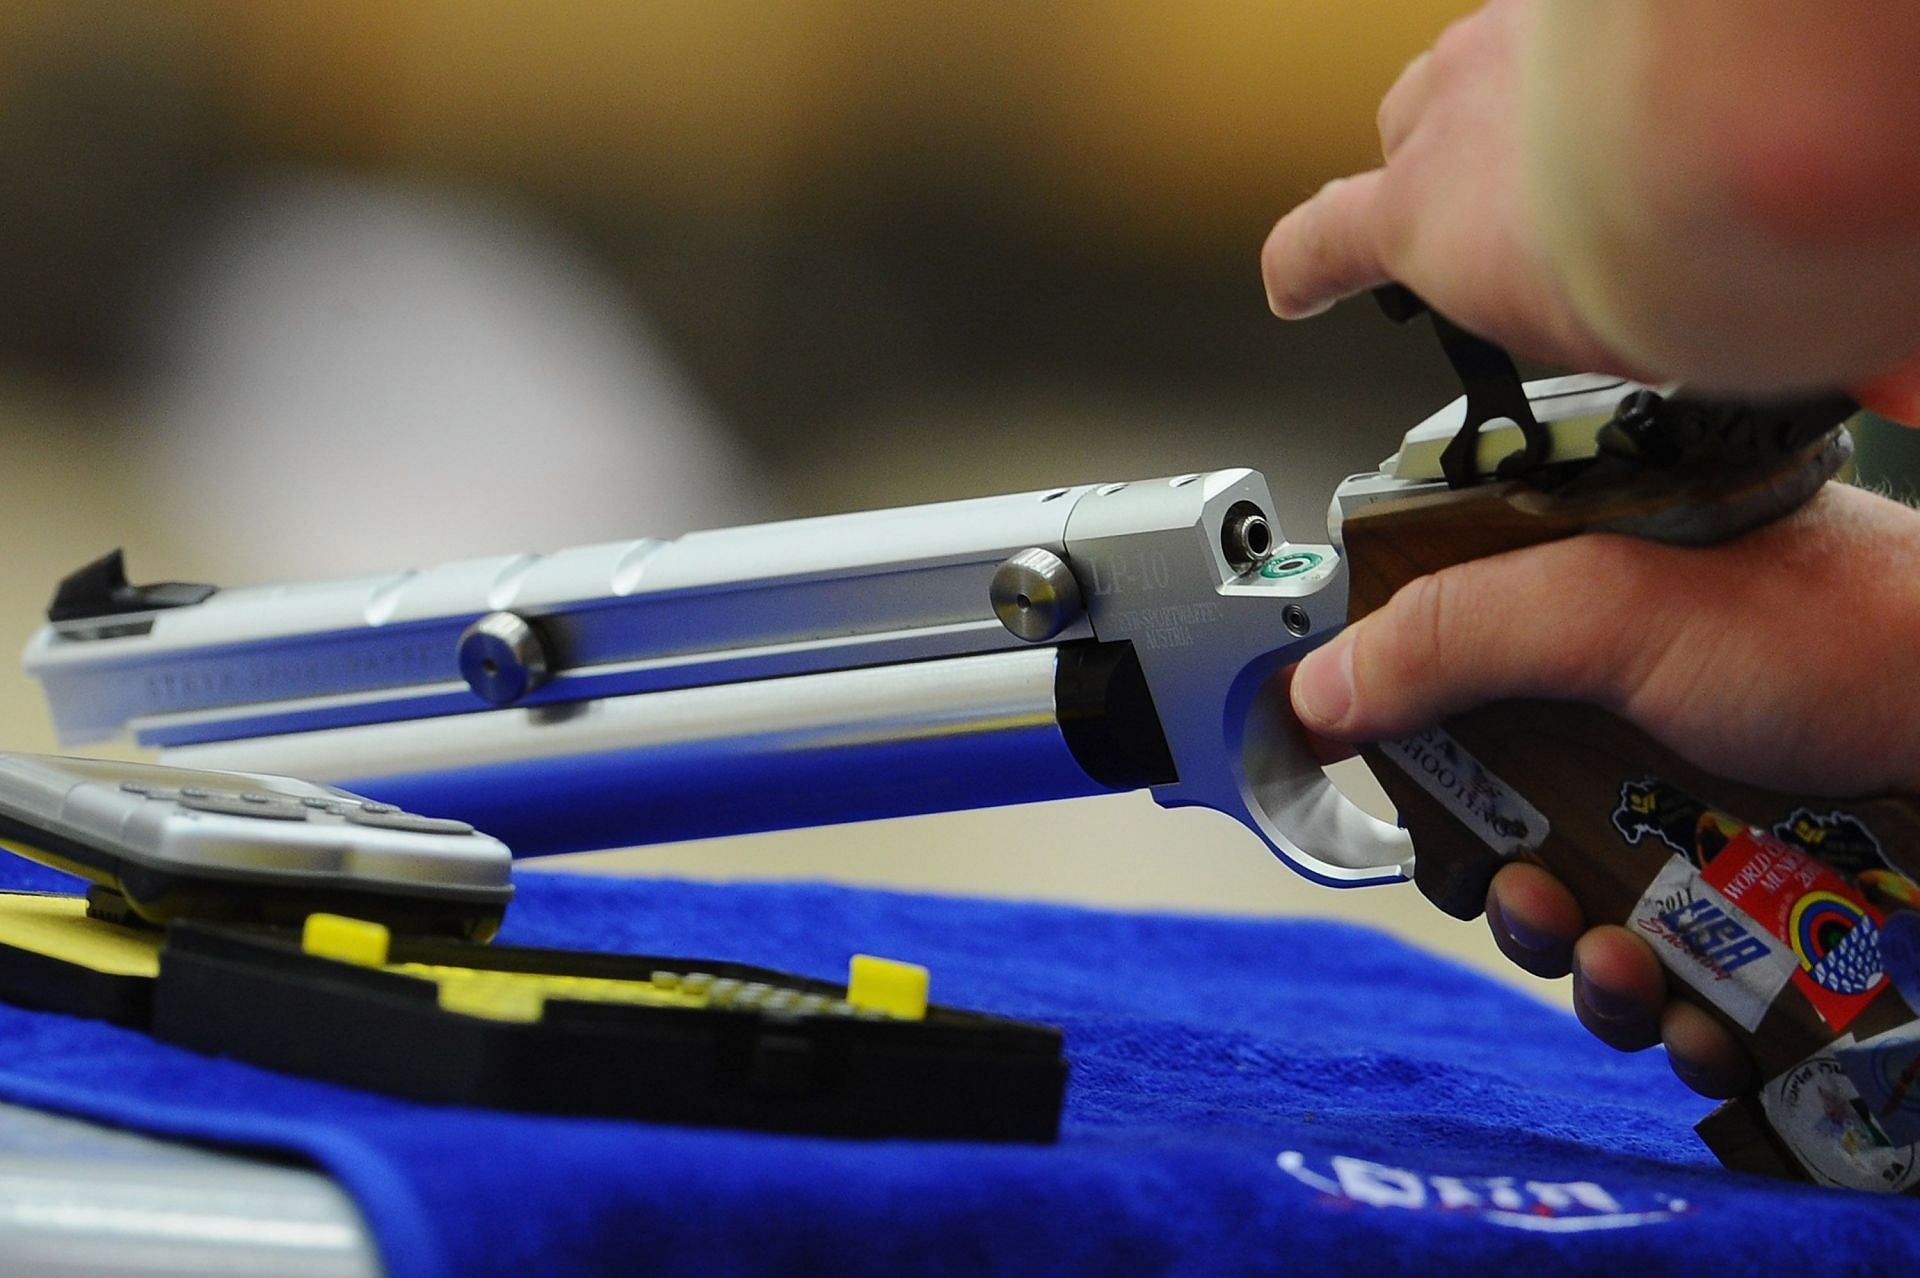 The USA squad won three medals in shooting on Day 6 of the 2023 Pan American Games in Santiago, Chile